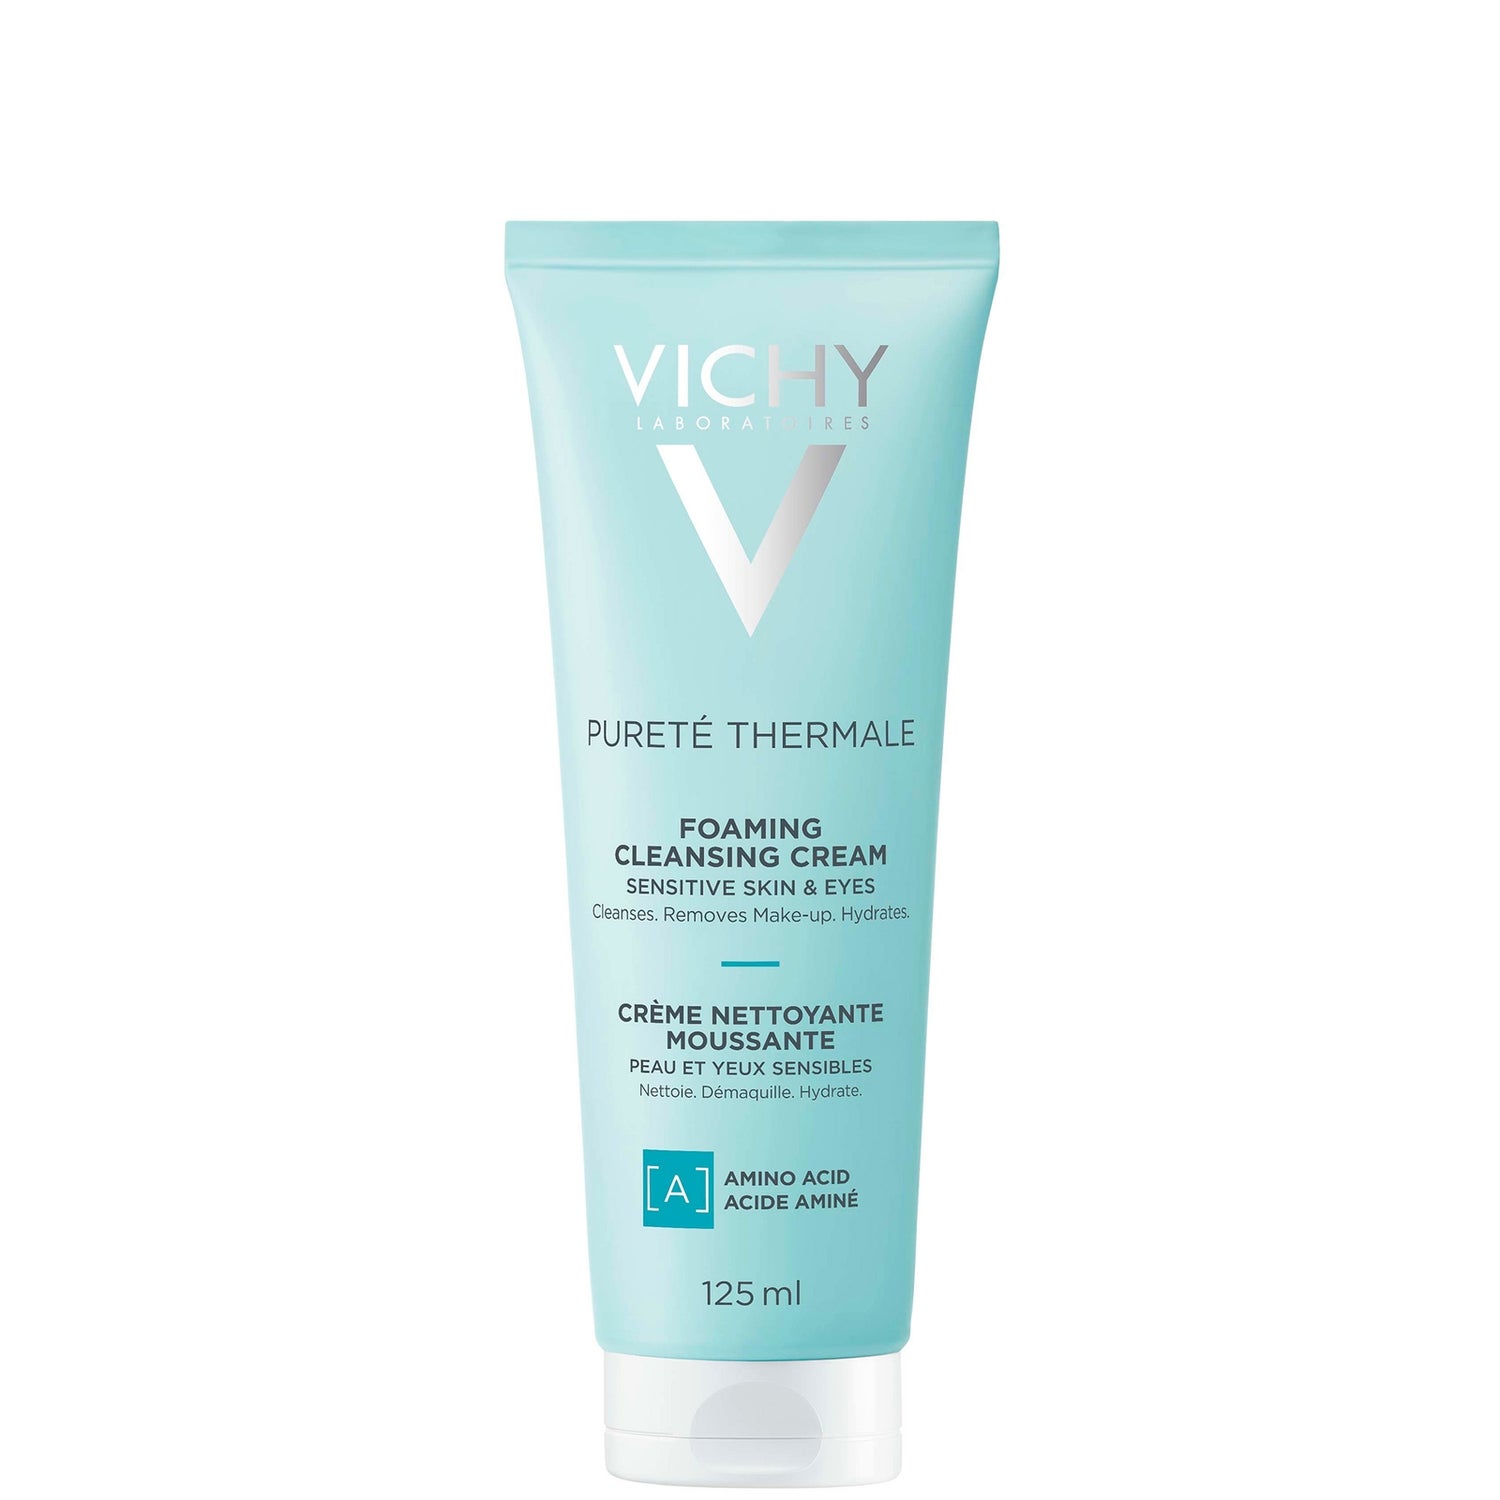 Vichy Purete Thermale Hydrating and Cleansing Foaming Cream (4.2 fl. oz.)